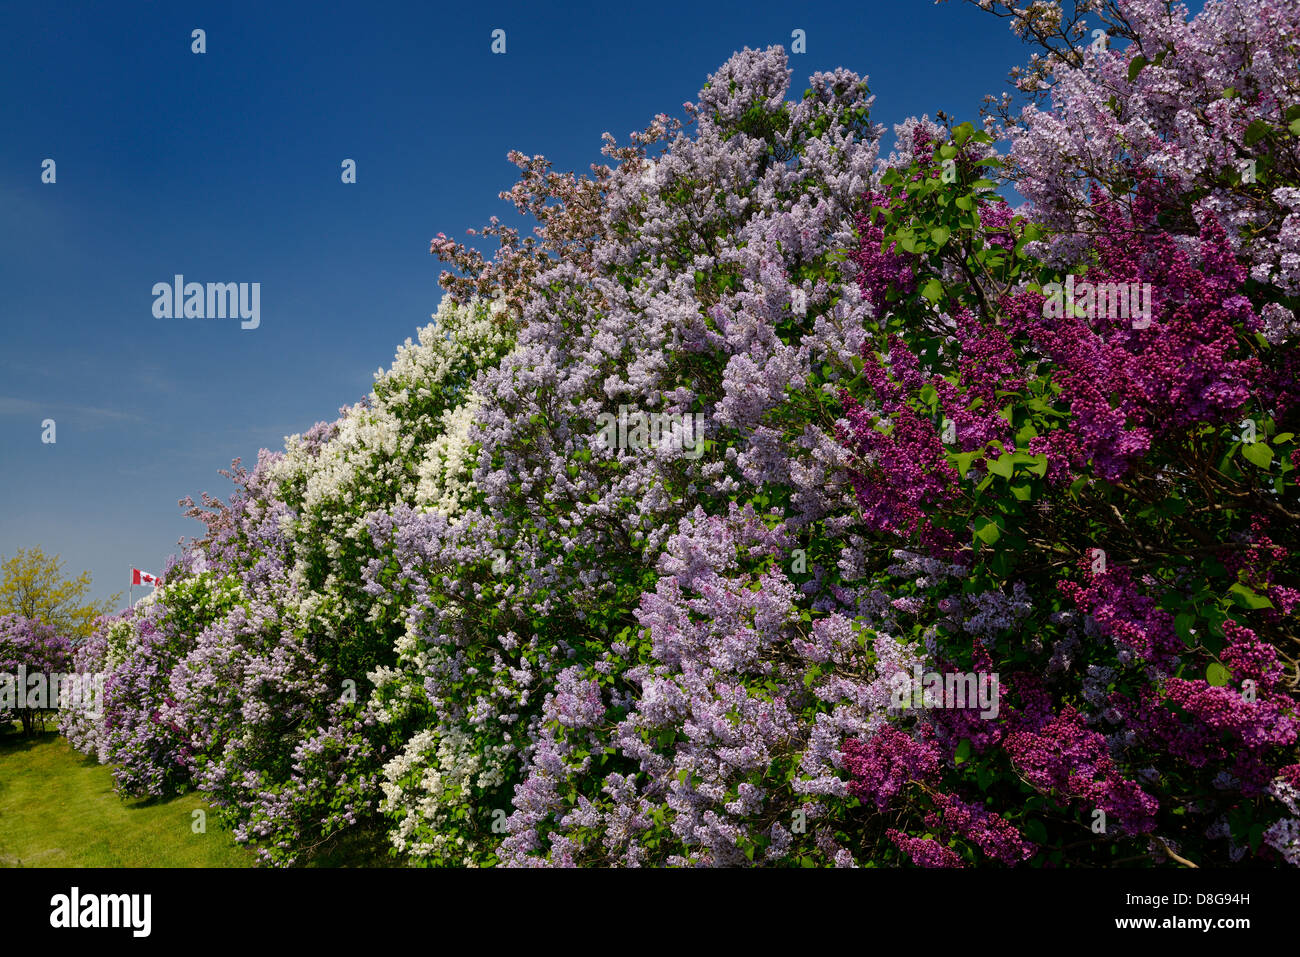 Canadian flag and border of naturalized Common Lilac bushes in bloom in Spring Vaughan Canada Stock Photo